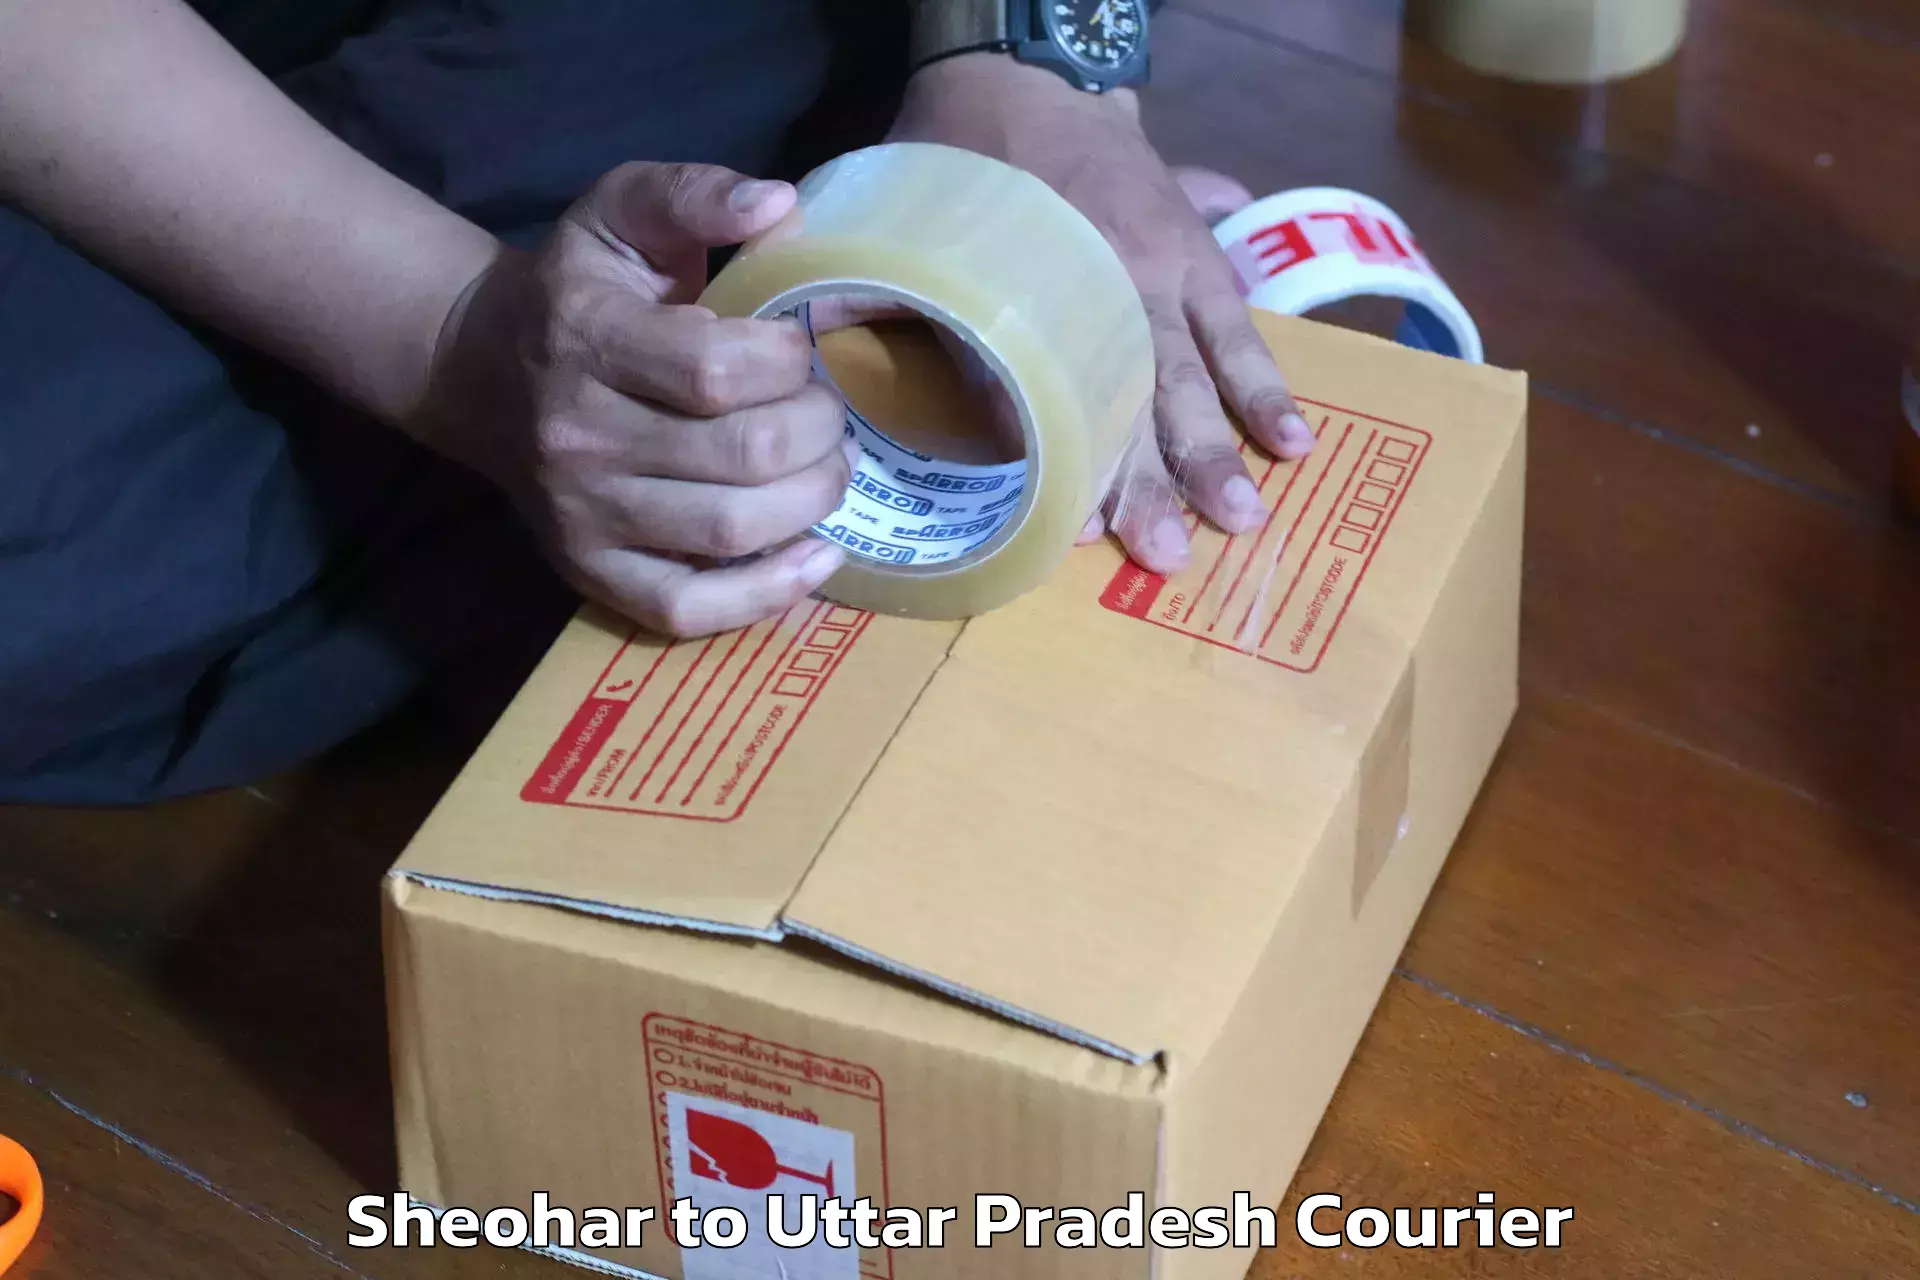 Efficient moving company Sheohar to Rampur